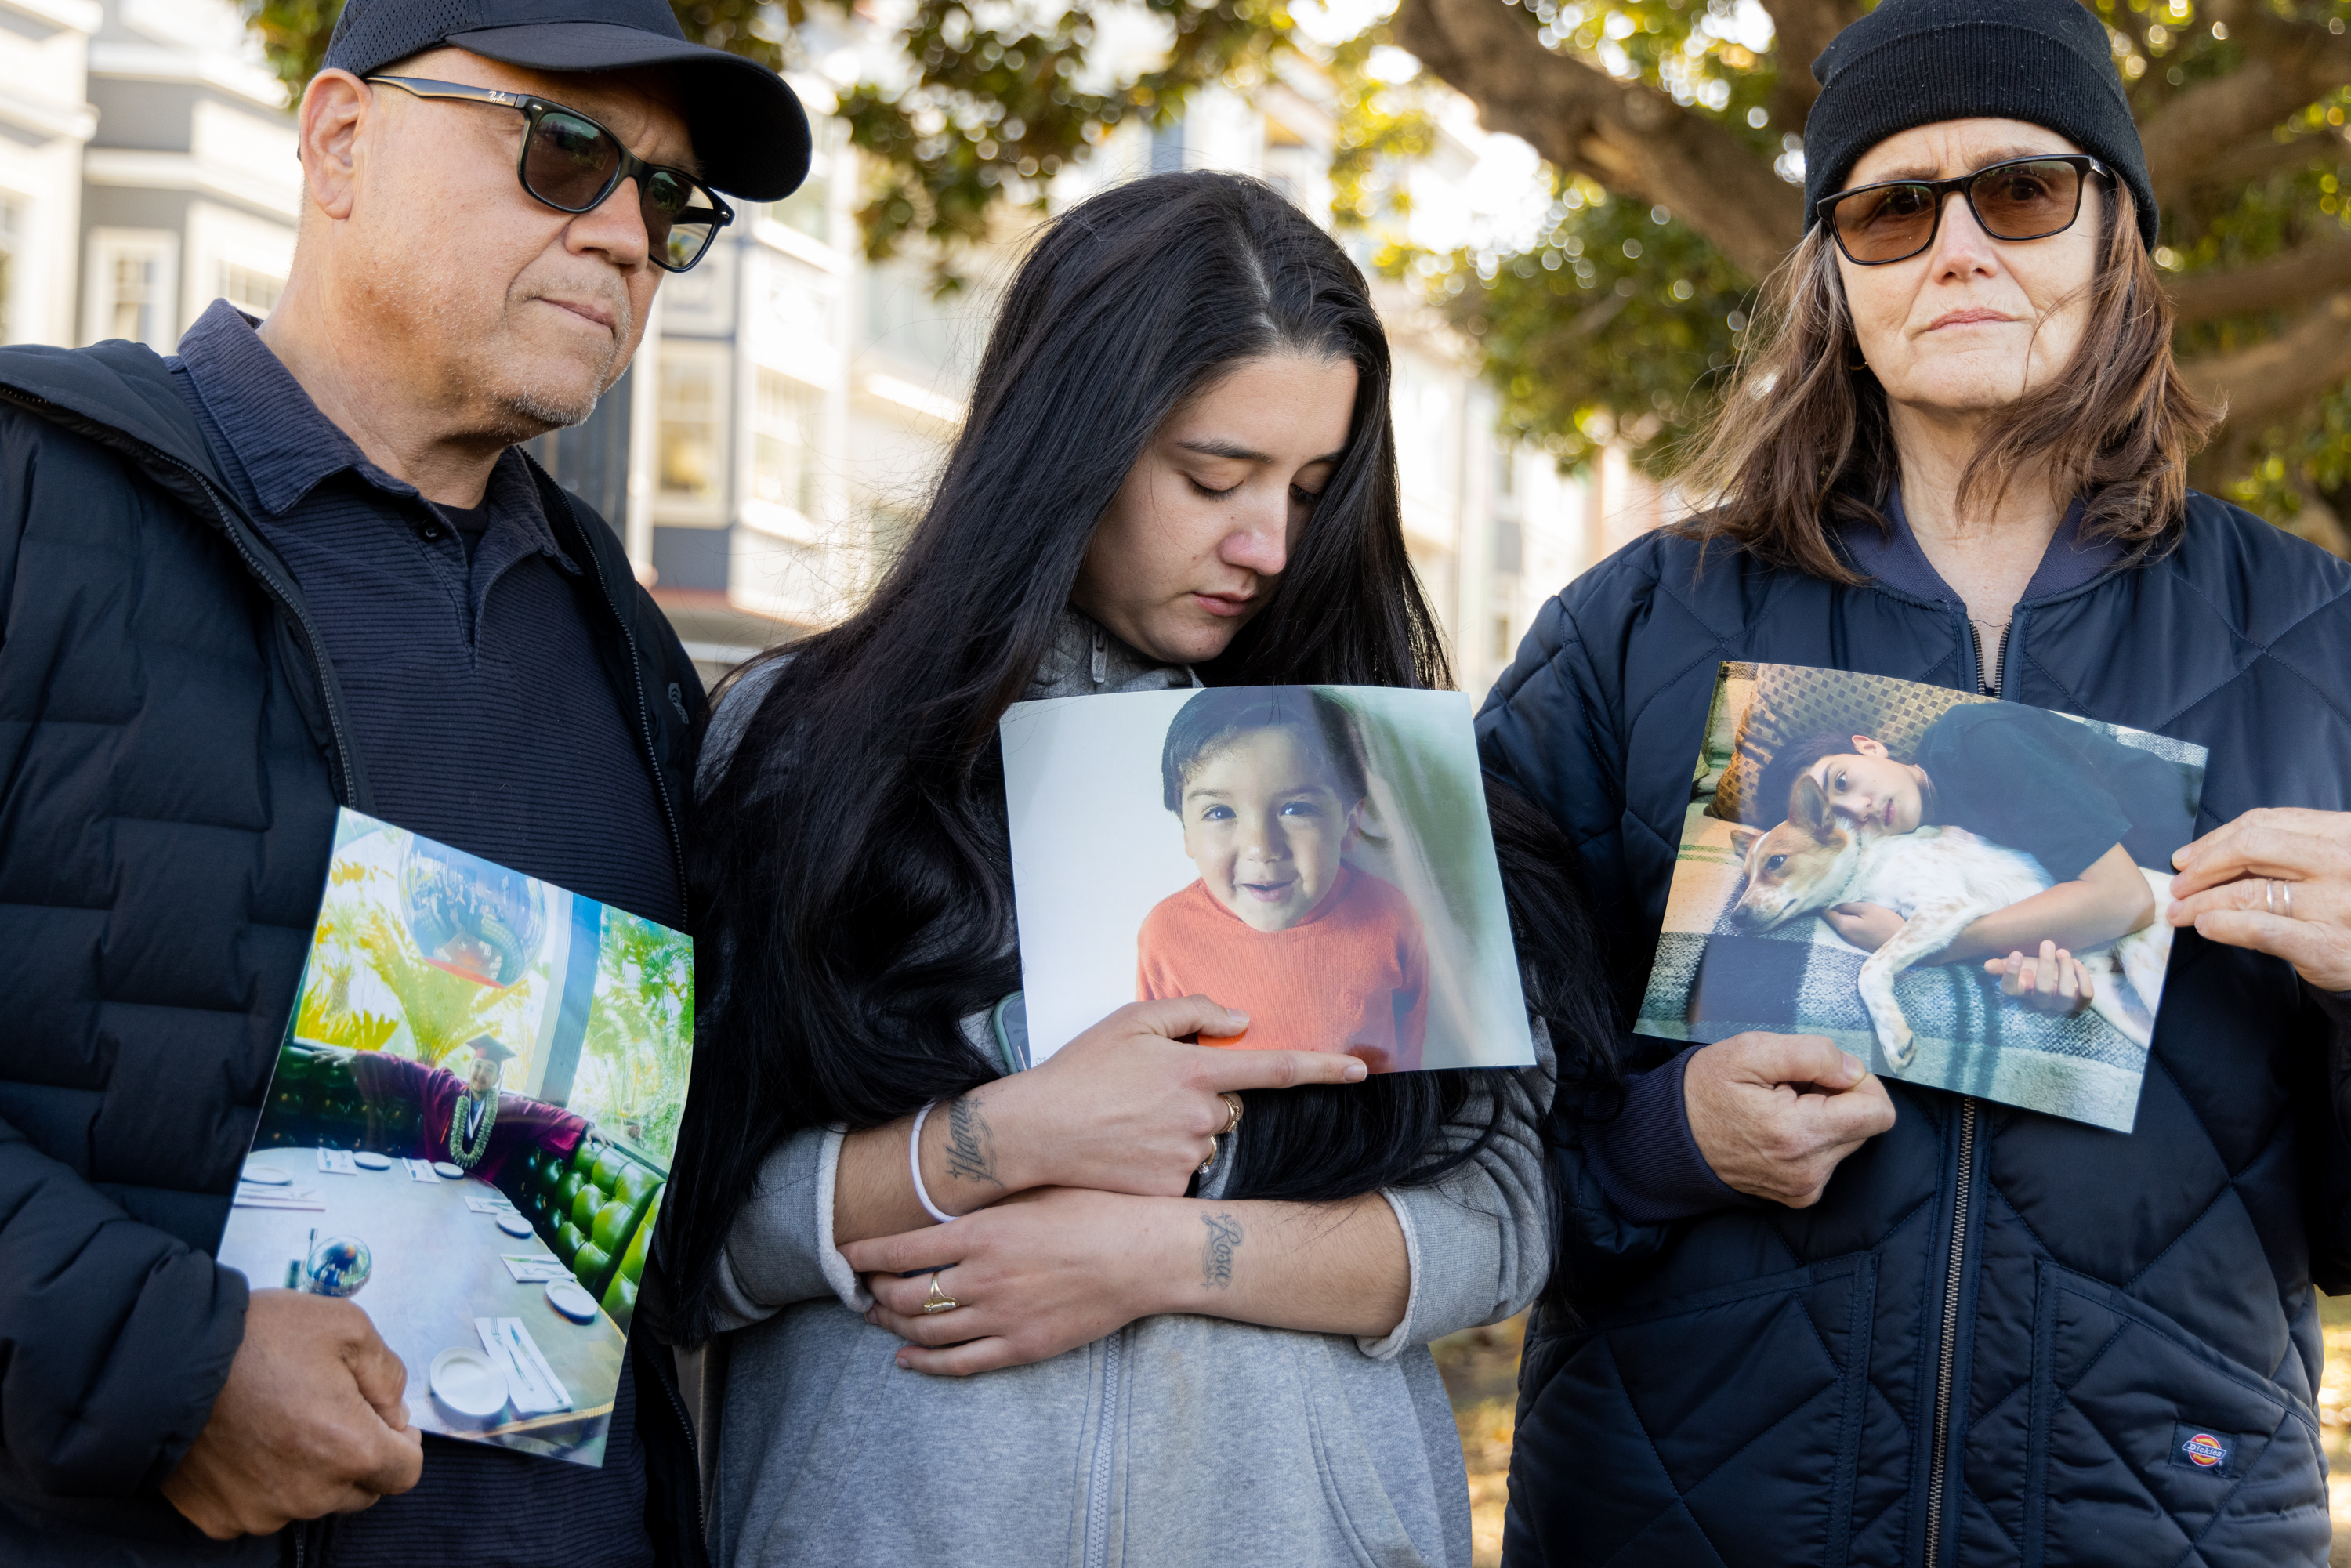 Three people stand holding photos, each looking solemn. The man on the left holds a picture of a colorful diner, the woman in the middle holds a child's photo, and the woman on the right holds a boy with a dog.